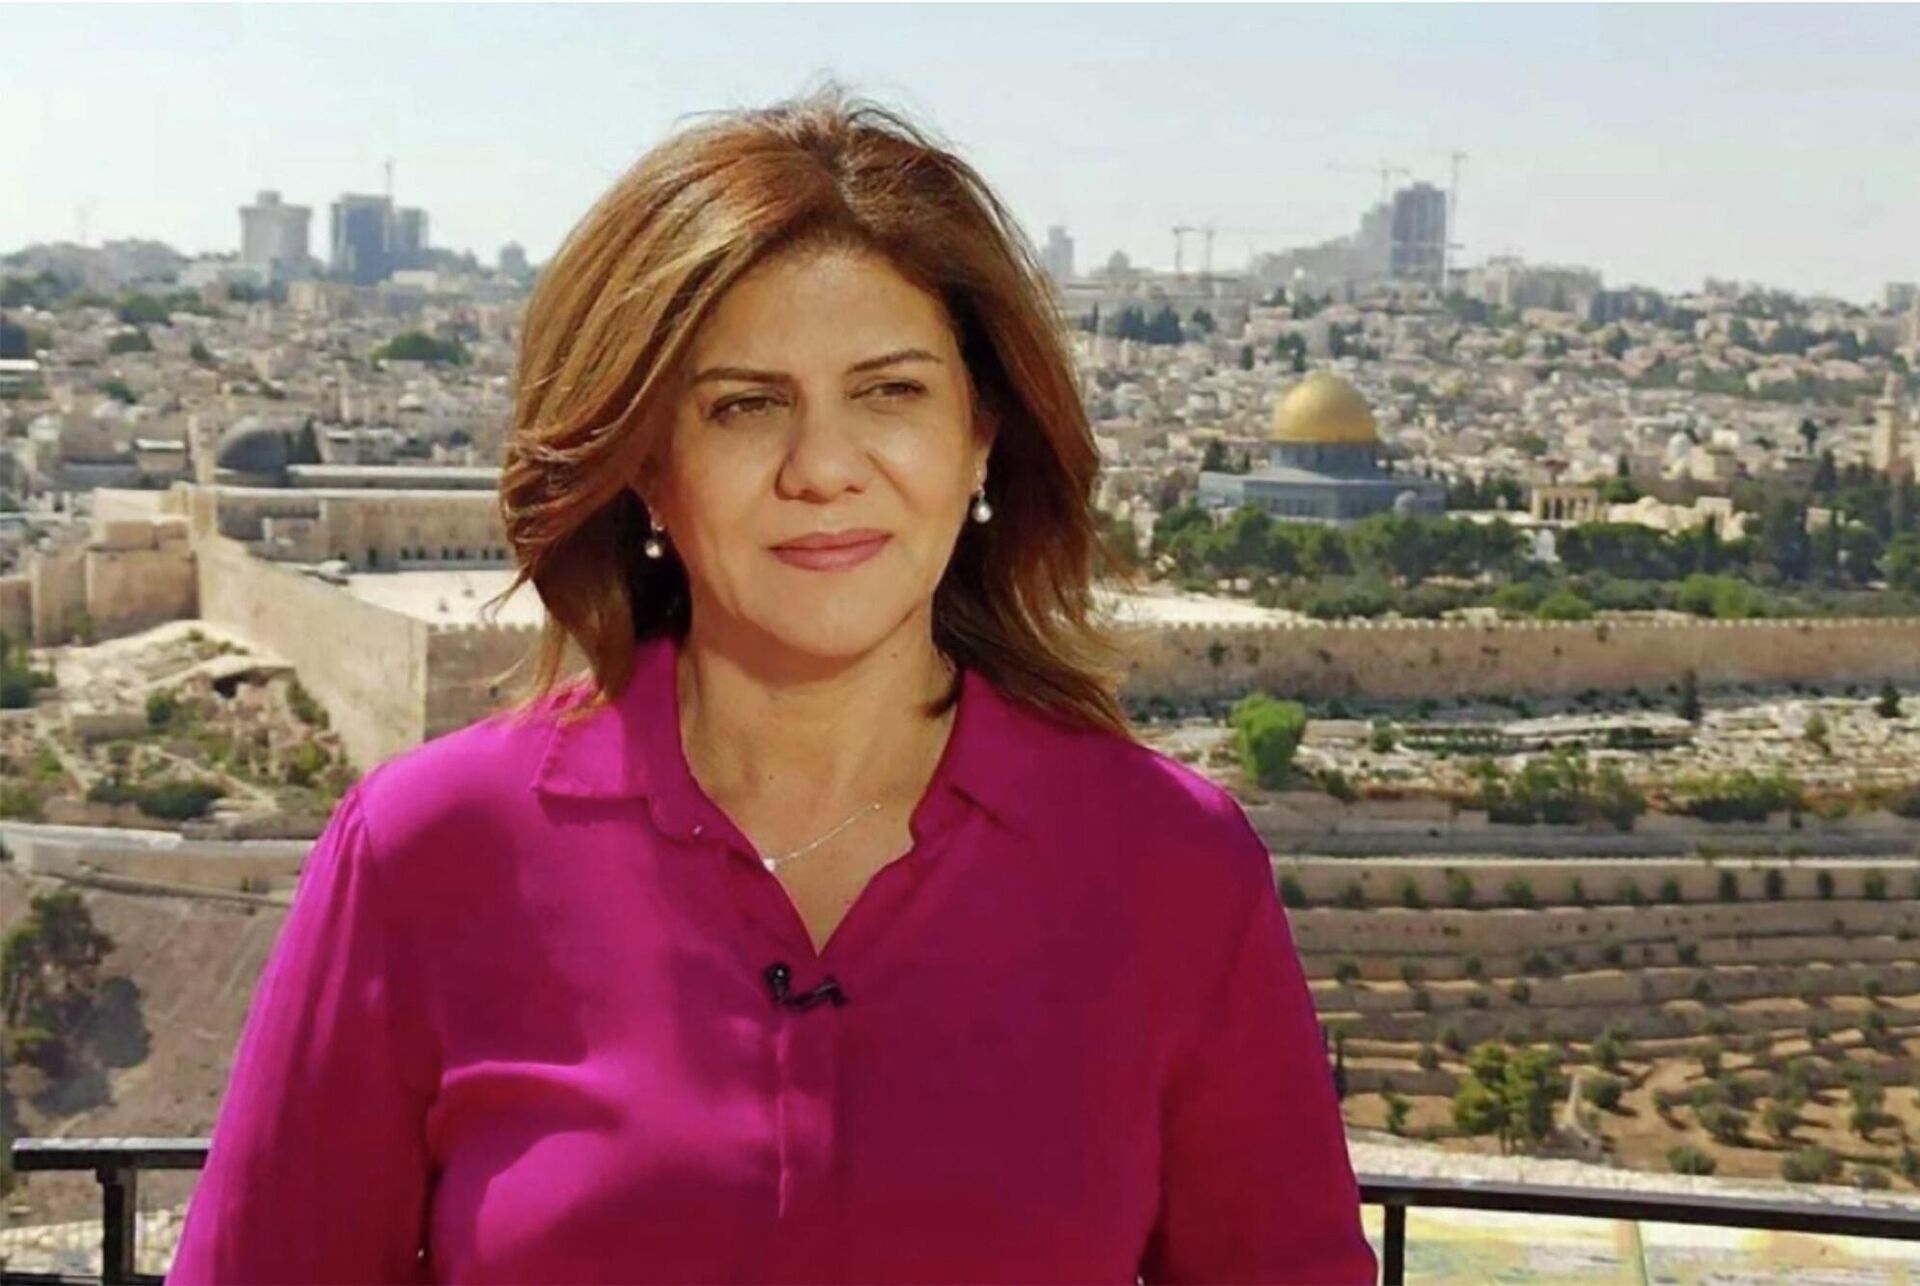 An undated handout photo released by the Doha-based Al-Jazeera TV shows the channel's veteran journalist Shireen Abu Aqleh (Akleh) during one of her reports from Jerusalem. - Sputnik International, 1920, 11.05.2022